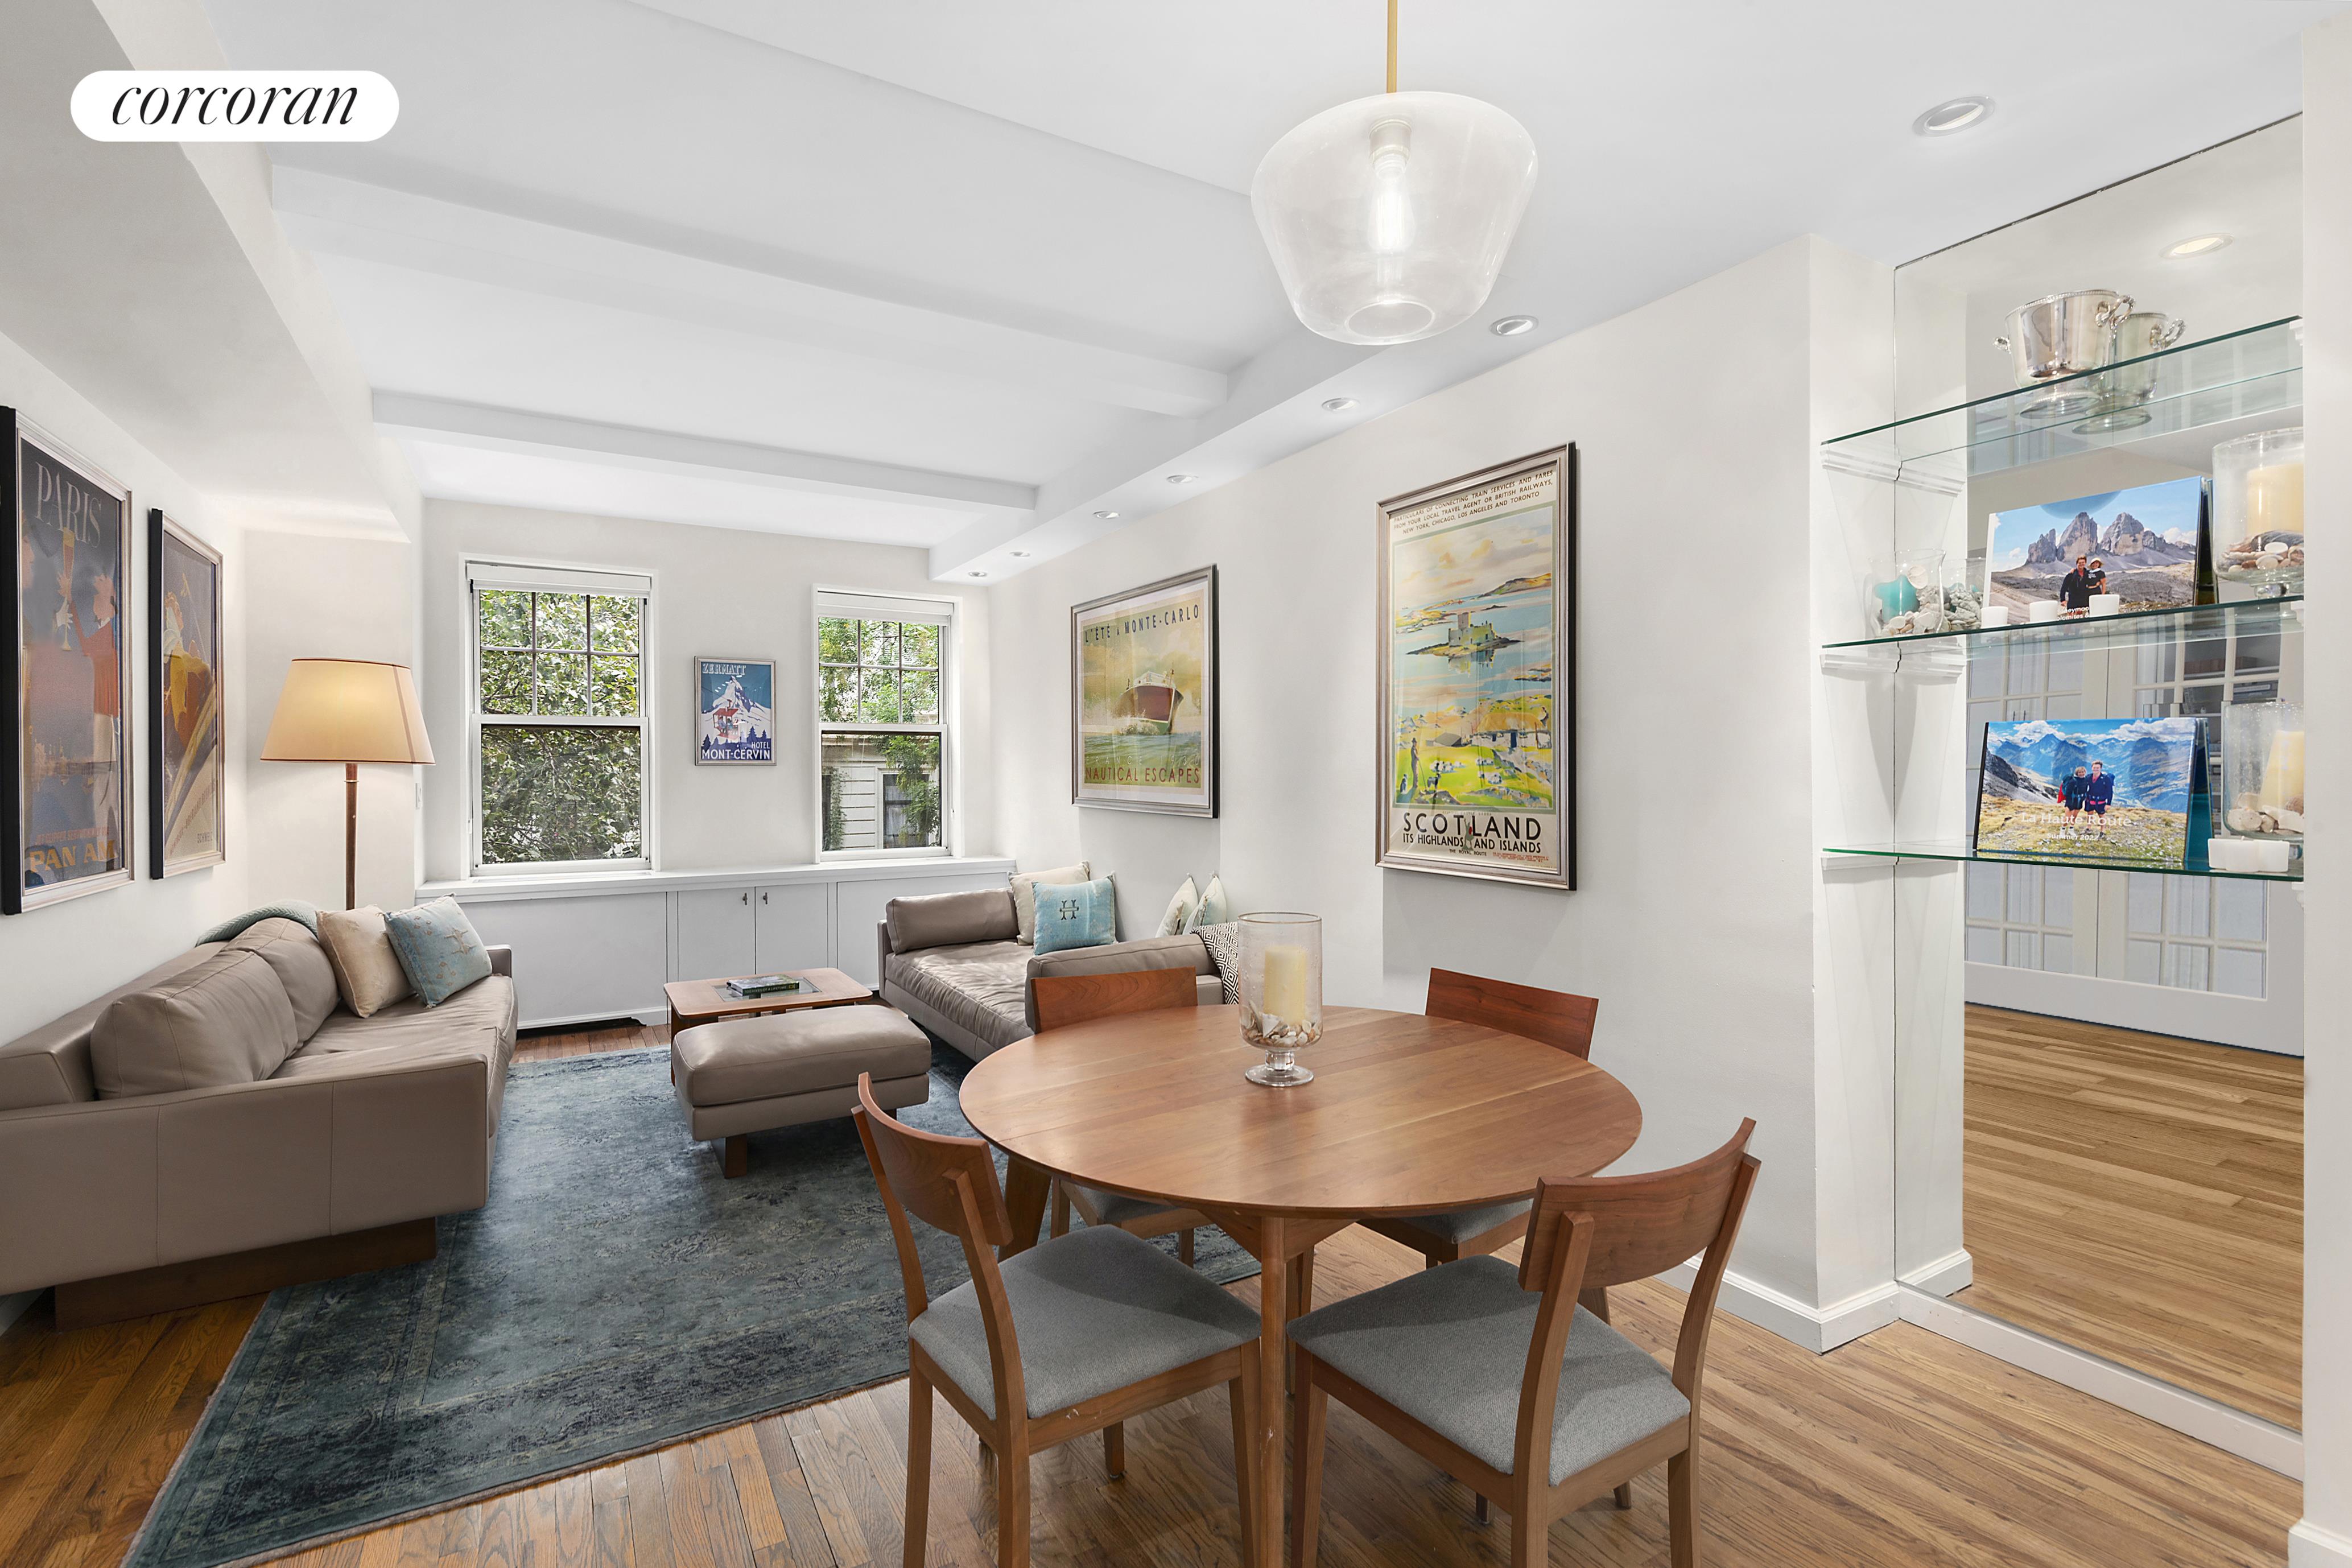 11 West 69th Street 2A, Lincoln Sq, Upper West Side, NYC - 2 Bedrooms  
2 Bathrooms  
4 Rooms - 